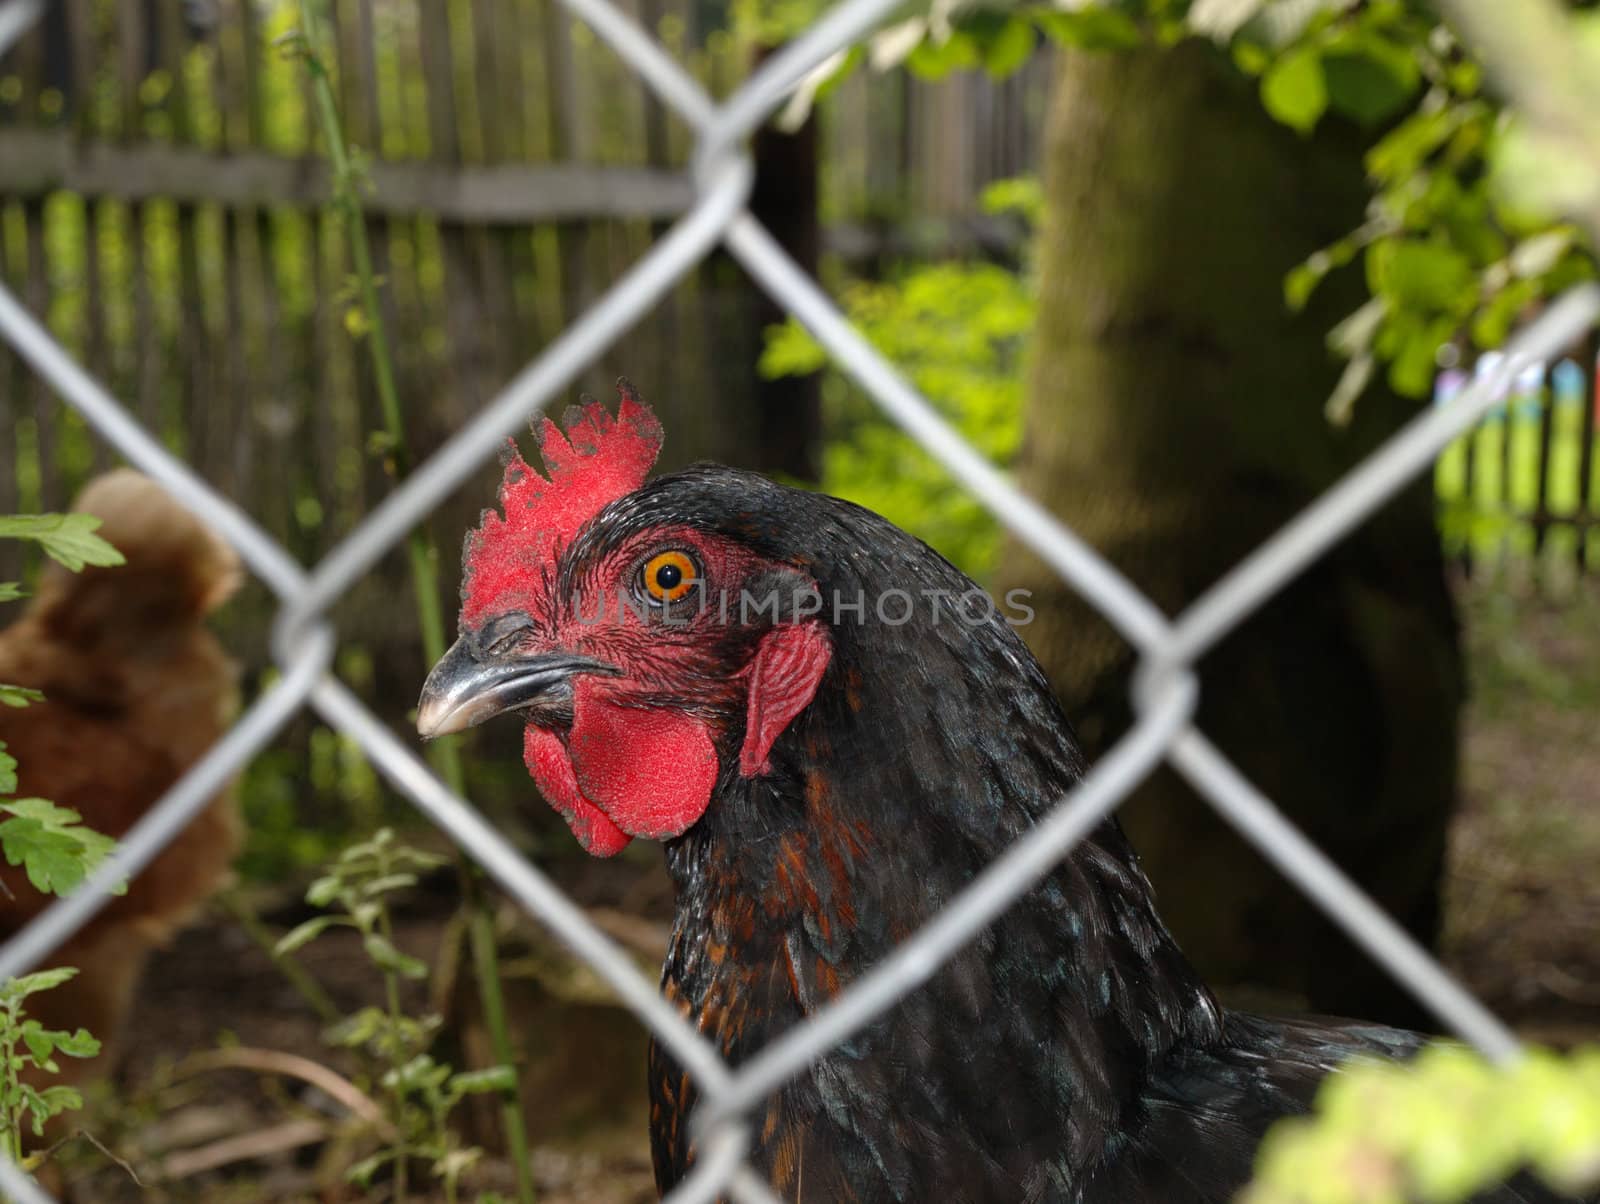 black hen behind the fence by renales